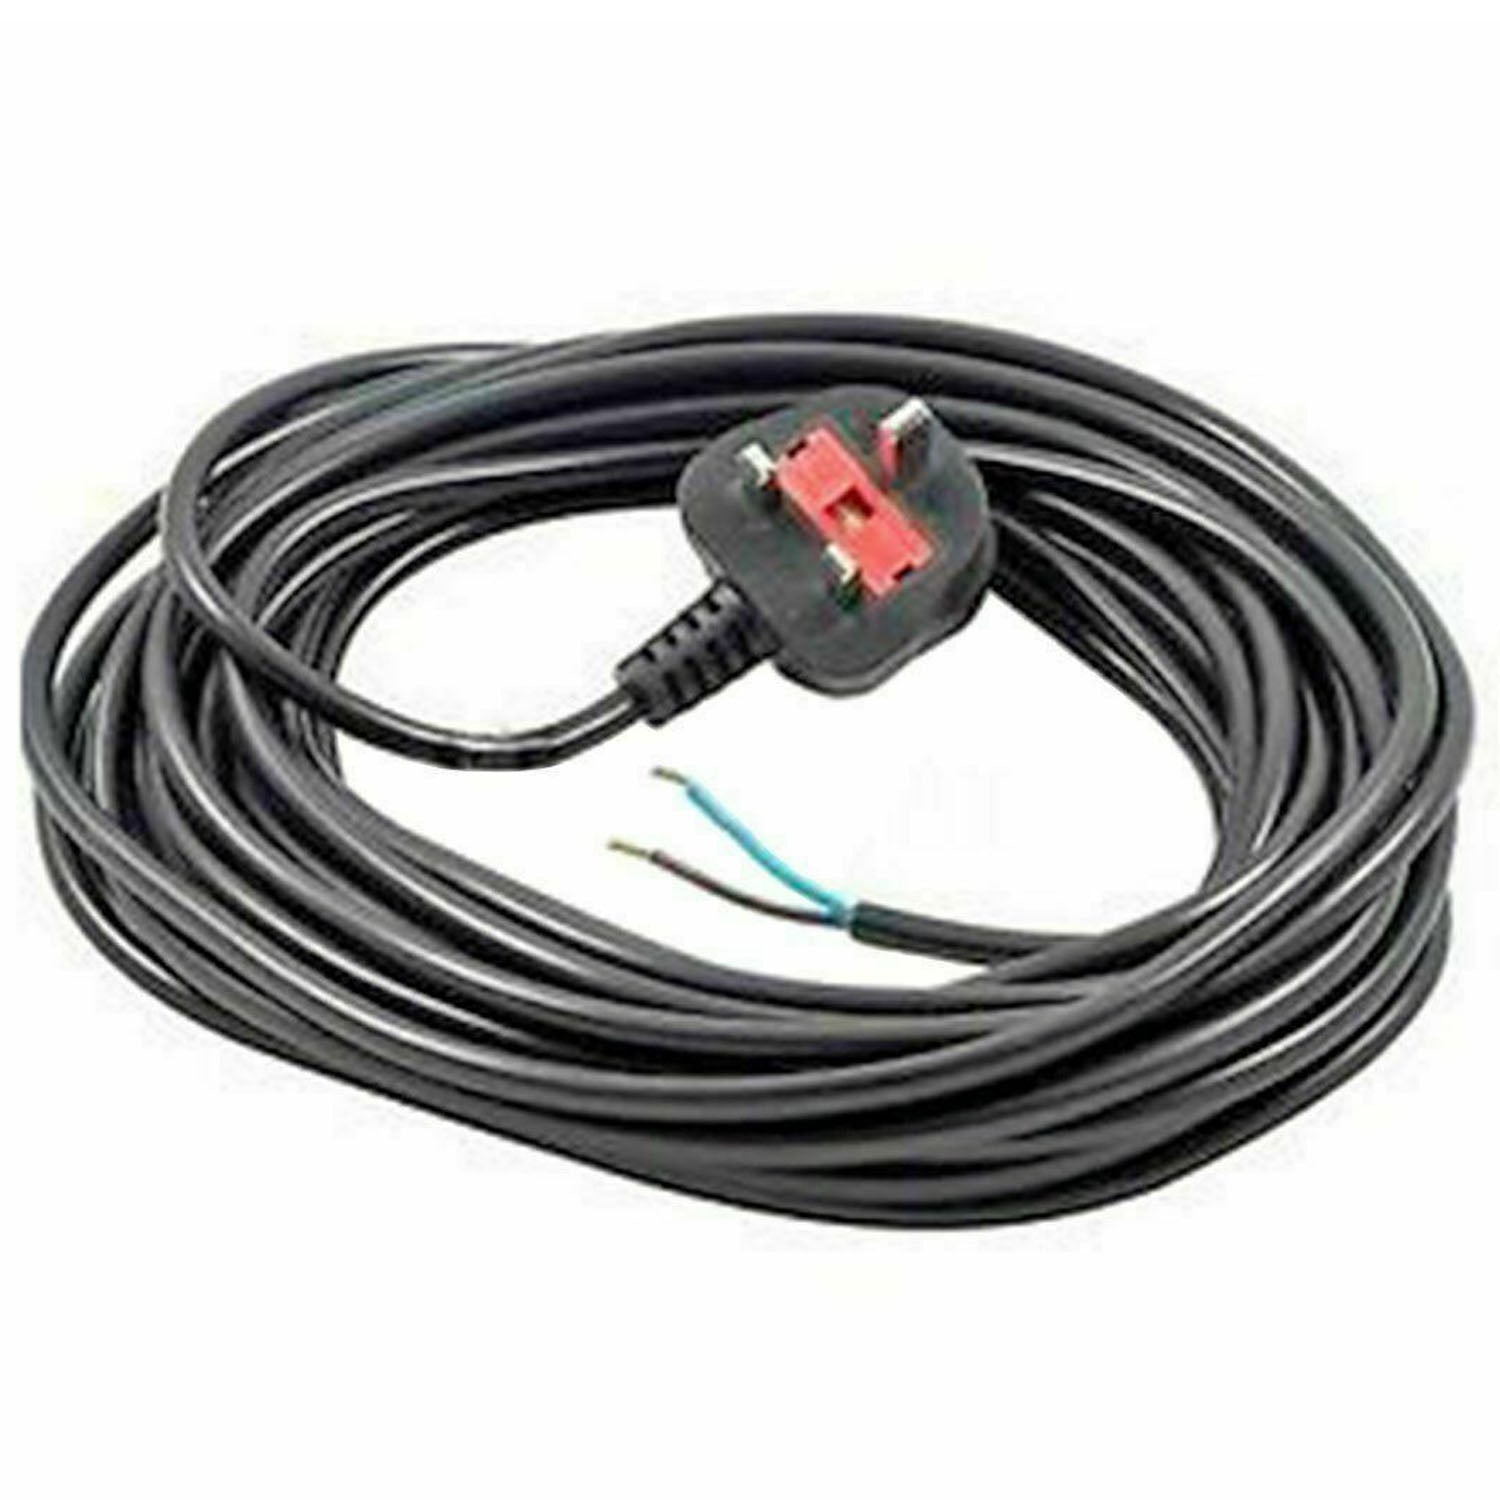 Power Cable for Numatic Henry Hetty Vacuum Cleaner Mains Power Lead (UK Plug, Black, 8.4m)